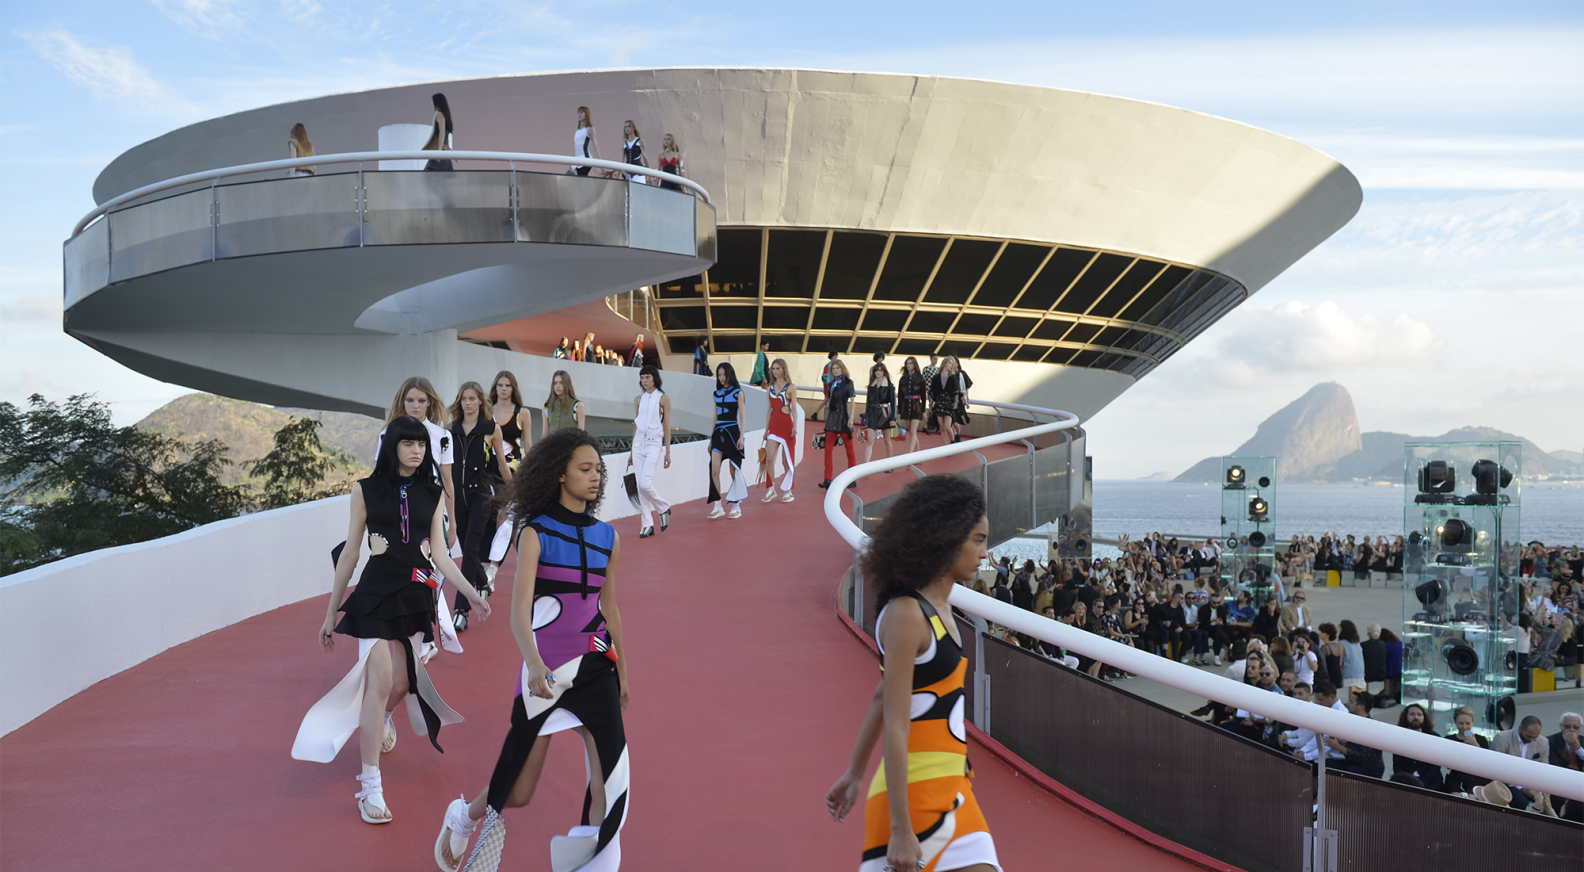 Louis Vuitton and Dior Just Showed Their Cruise Shows, but What